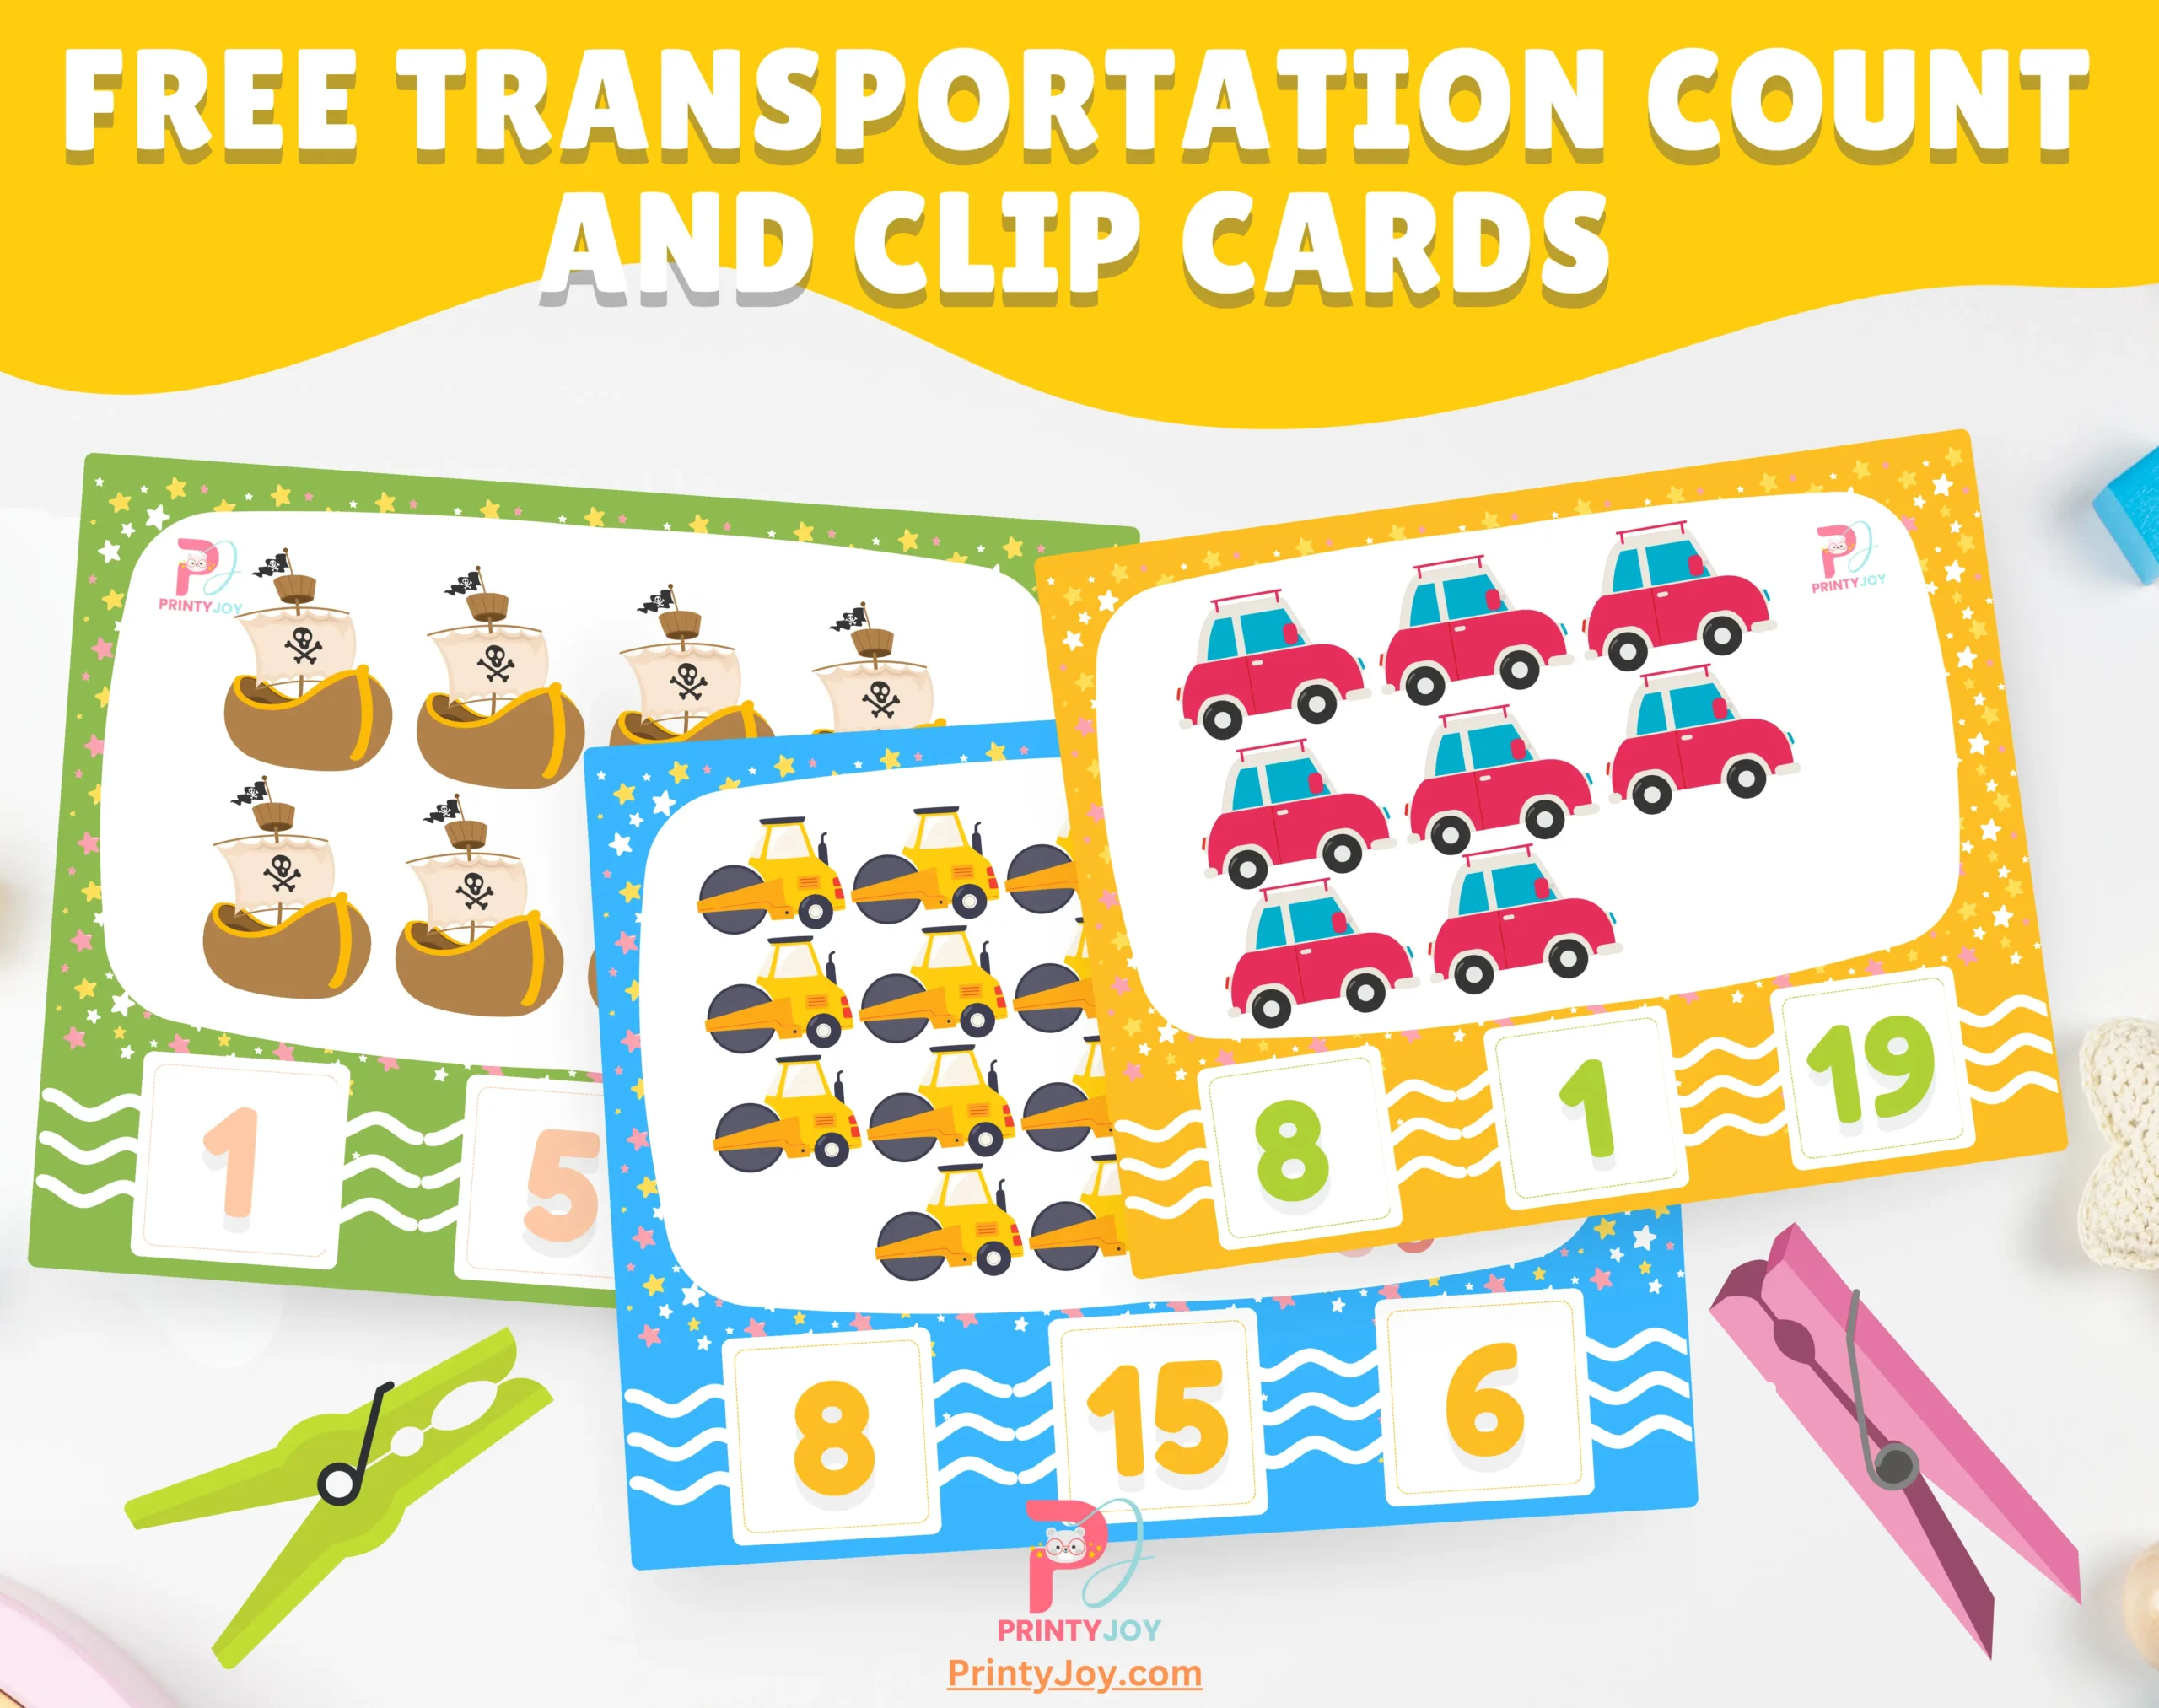 Free Transportation Count and Clip Cards